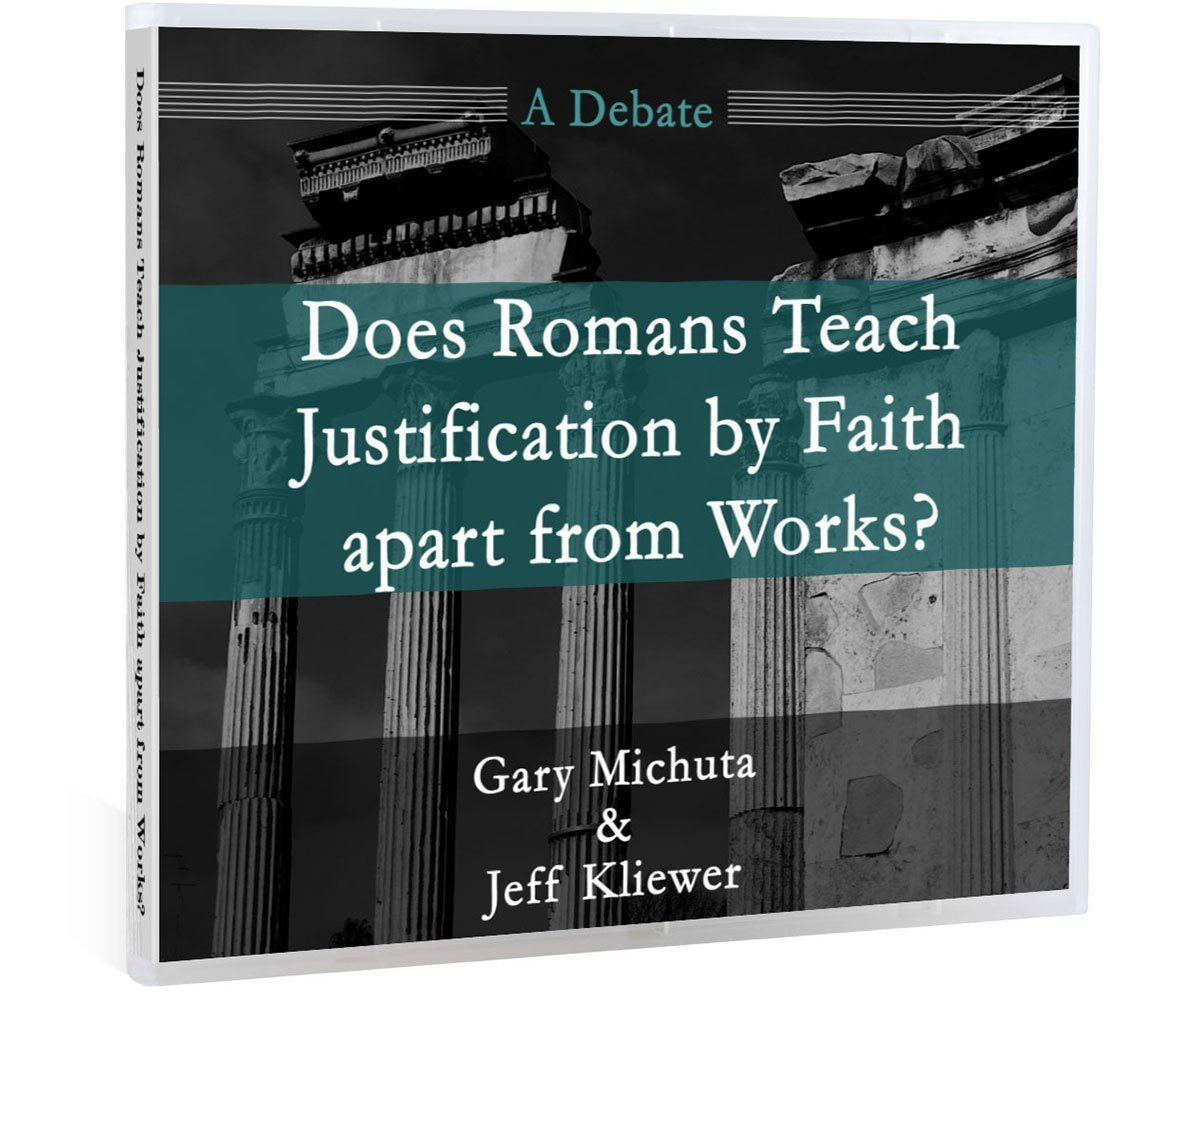 A debate on whether or not the Book of Romans teach justification by faith alone CD